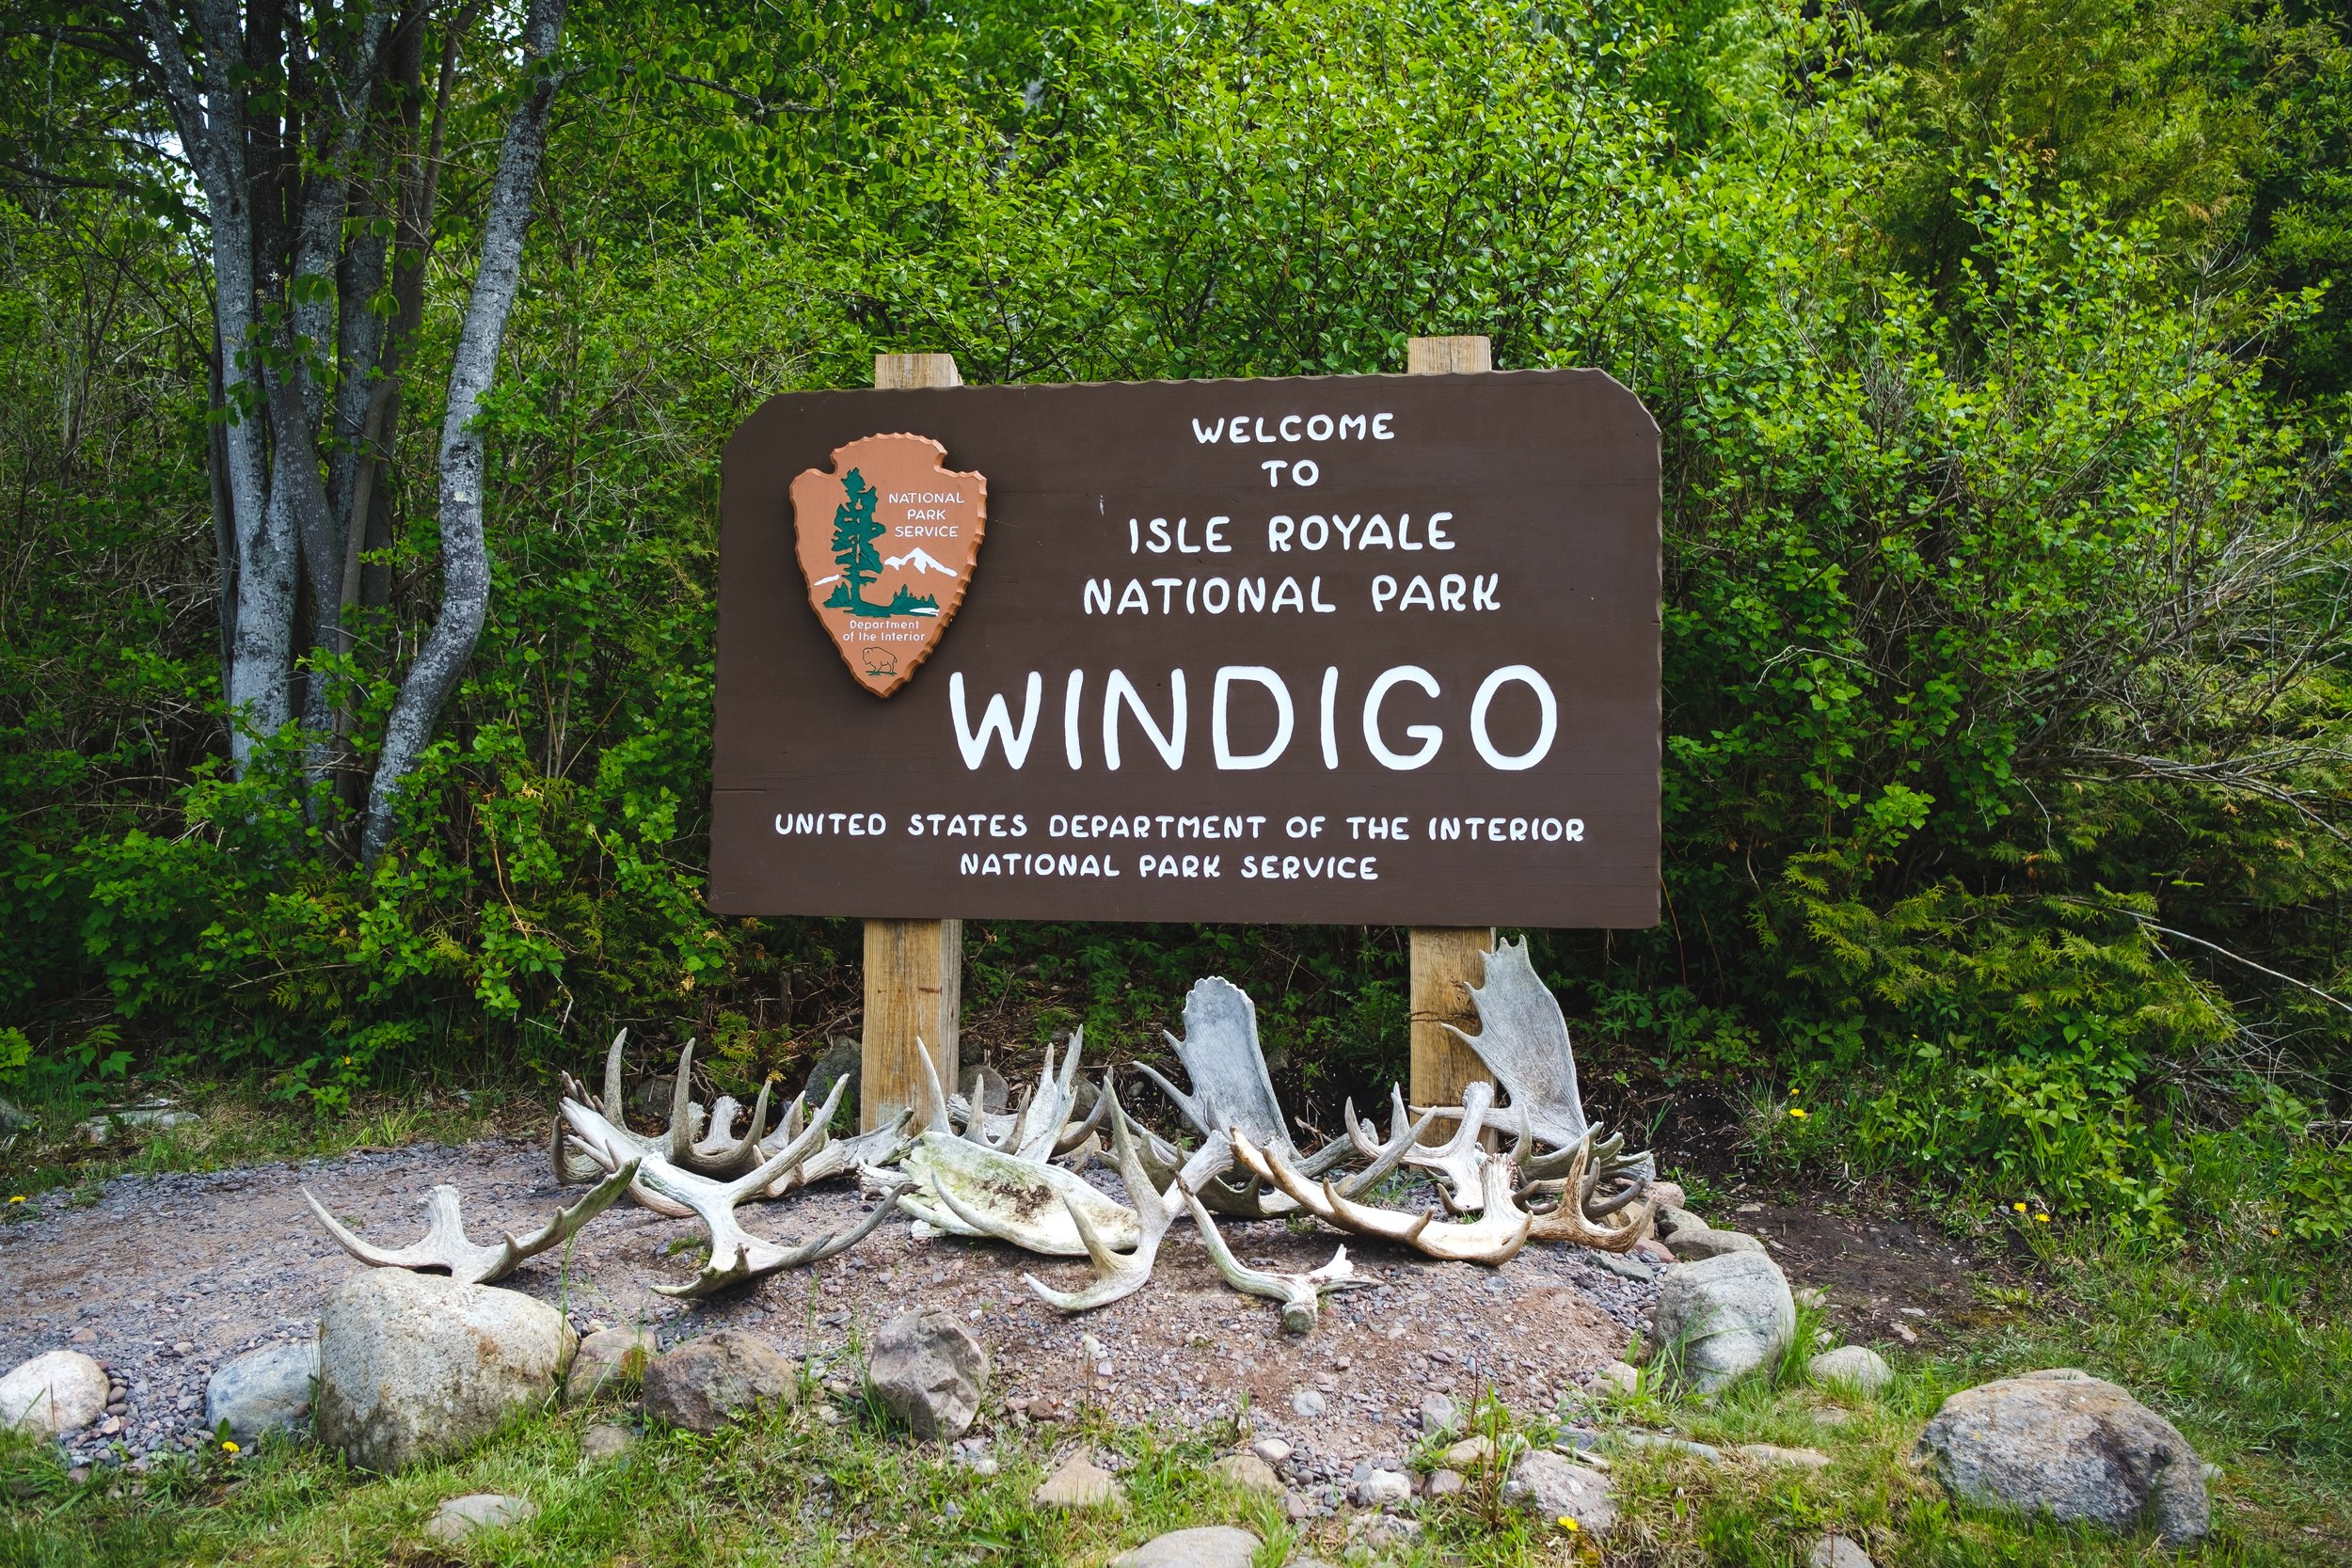  The welcome sign on Isle Royale. One of the few sights we saw outside of the visitor’s center. 